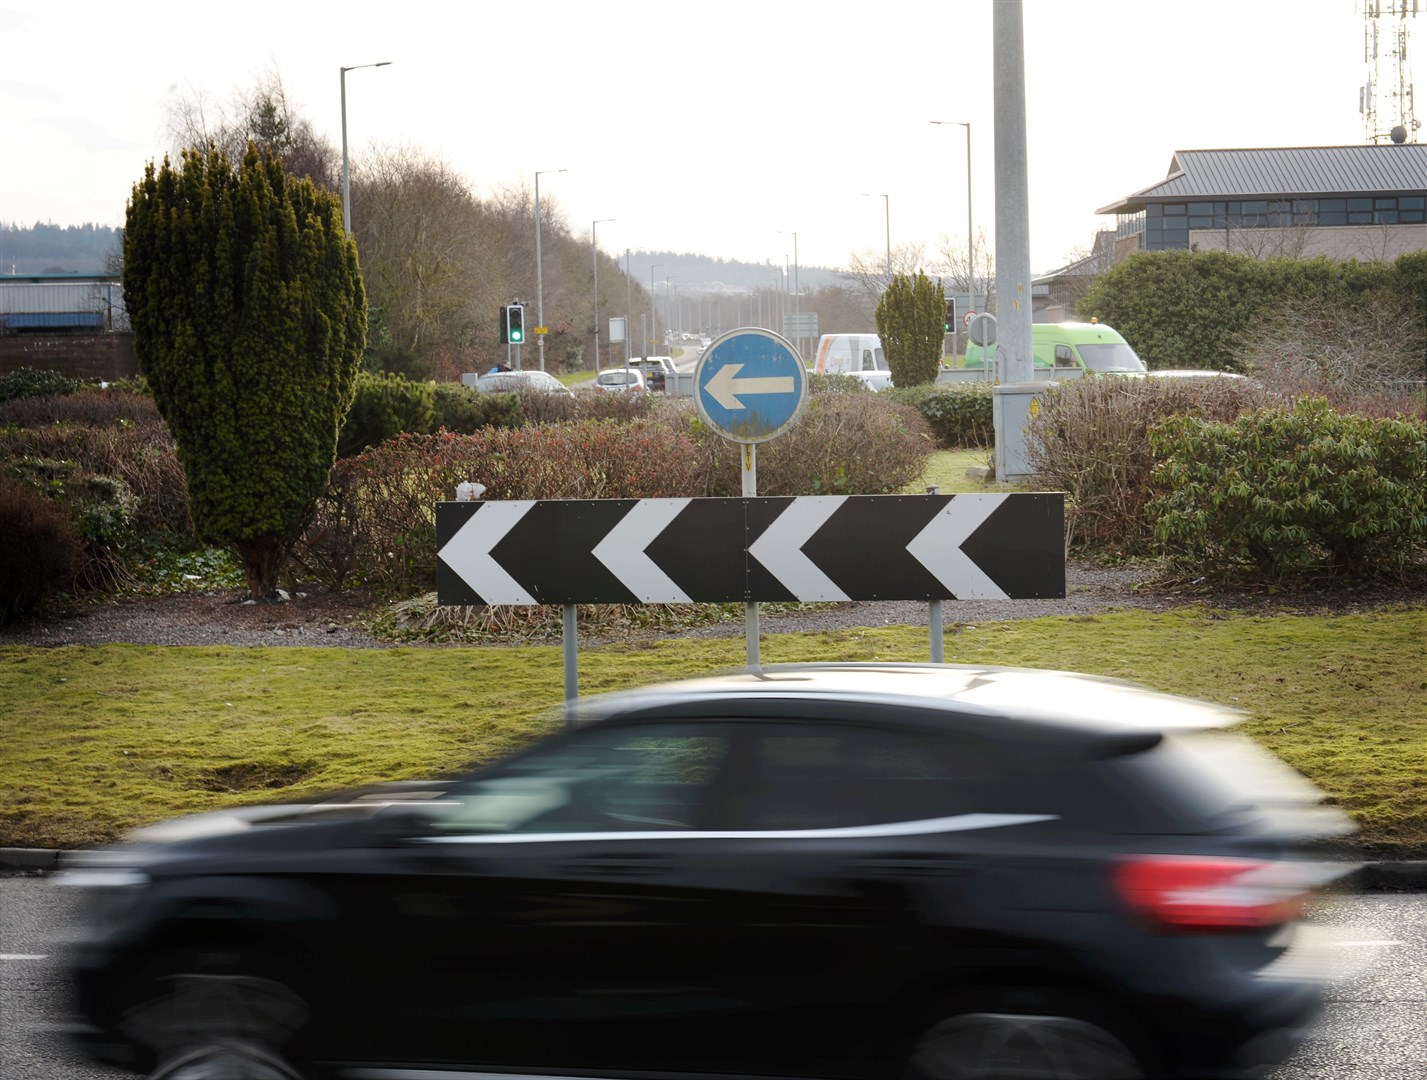 Plans to redesign Inshes roundabout will be the subject of a public consultation.